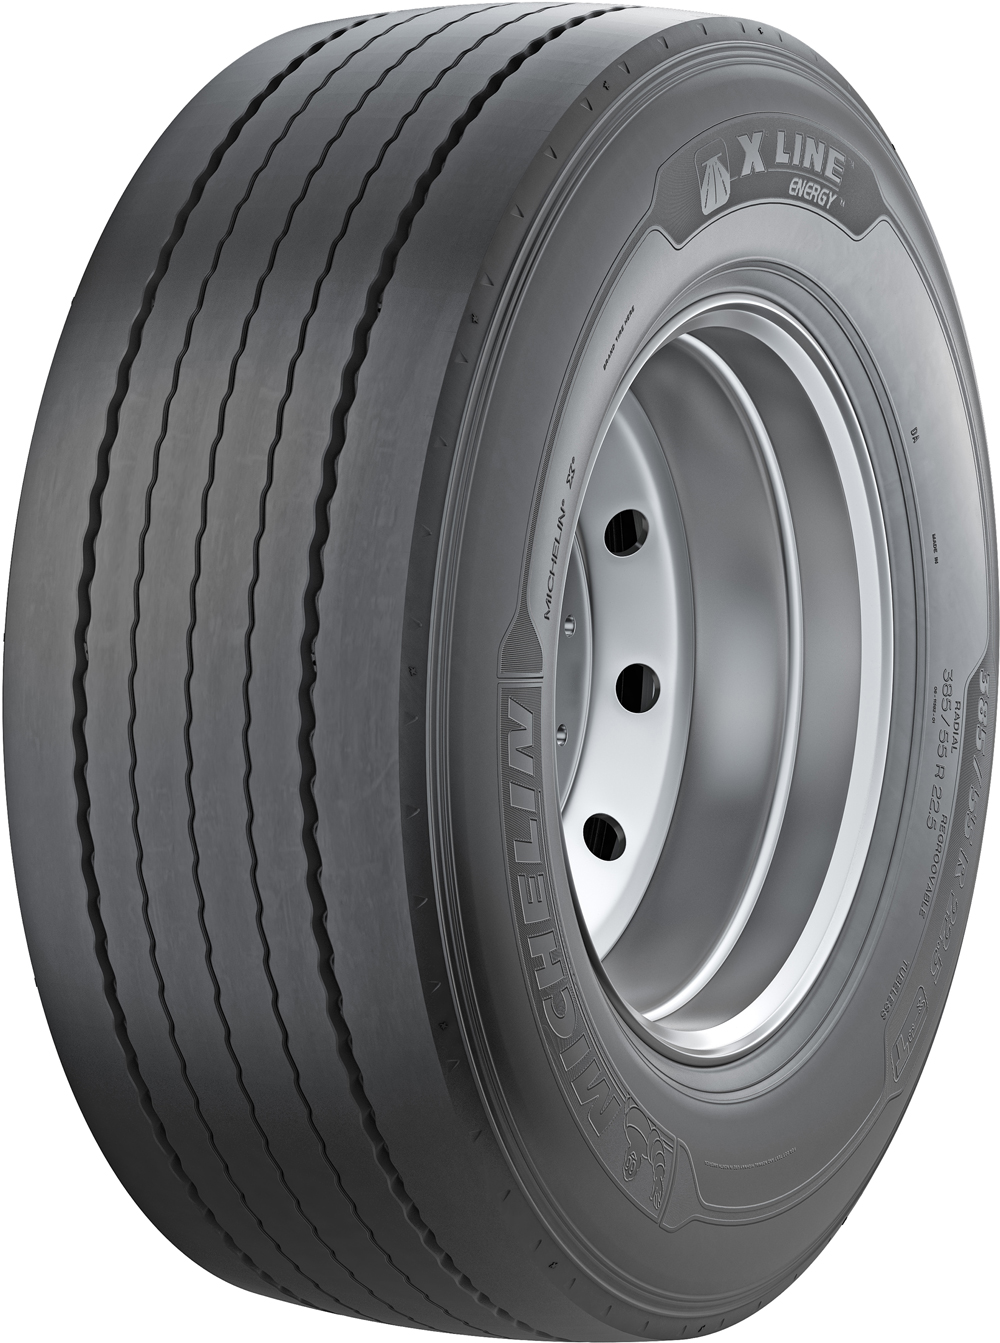 Anvelope camion MICHELIN XLINET 235/75 R17.5 143J